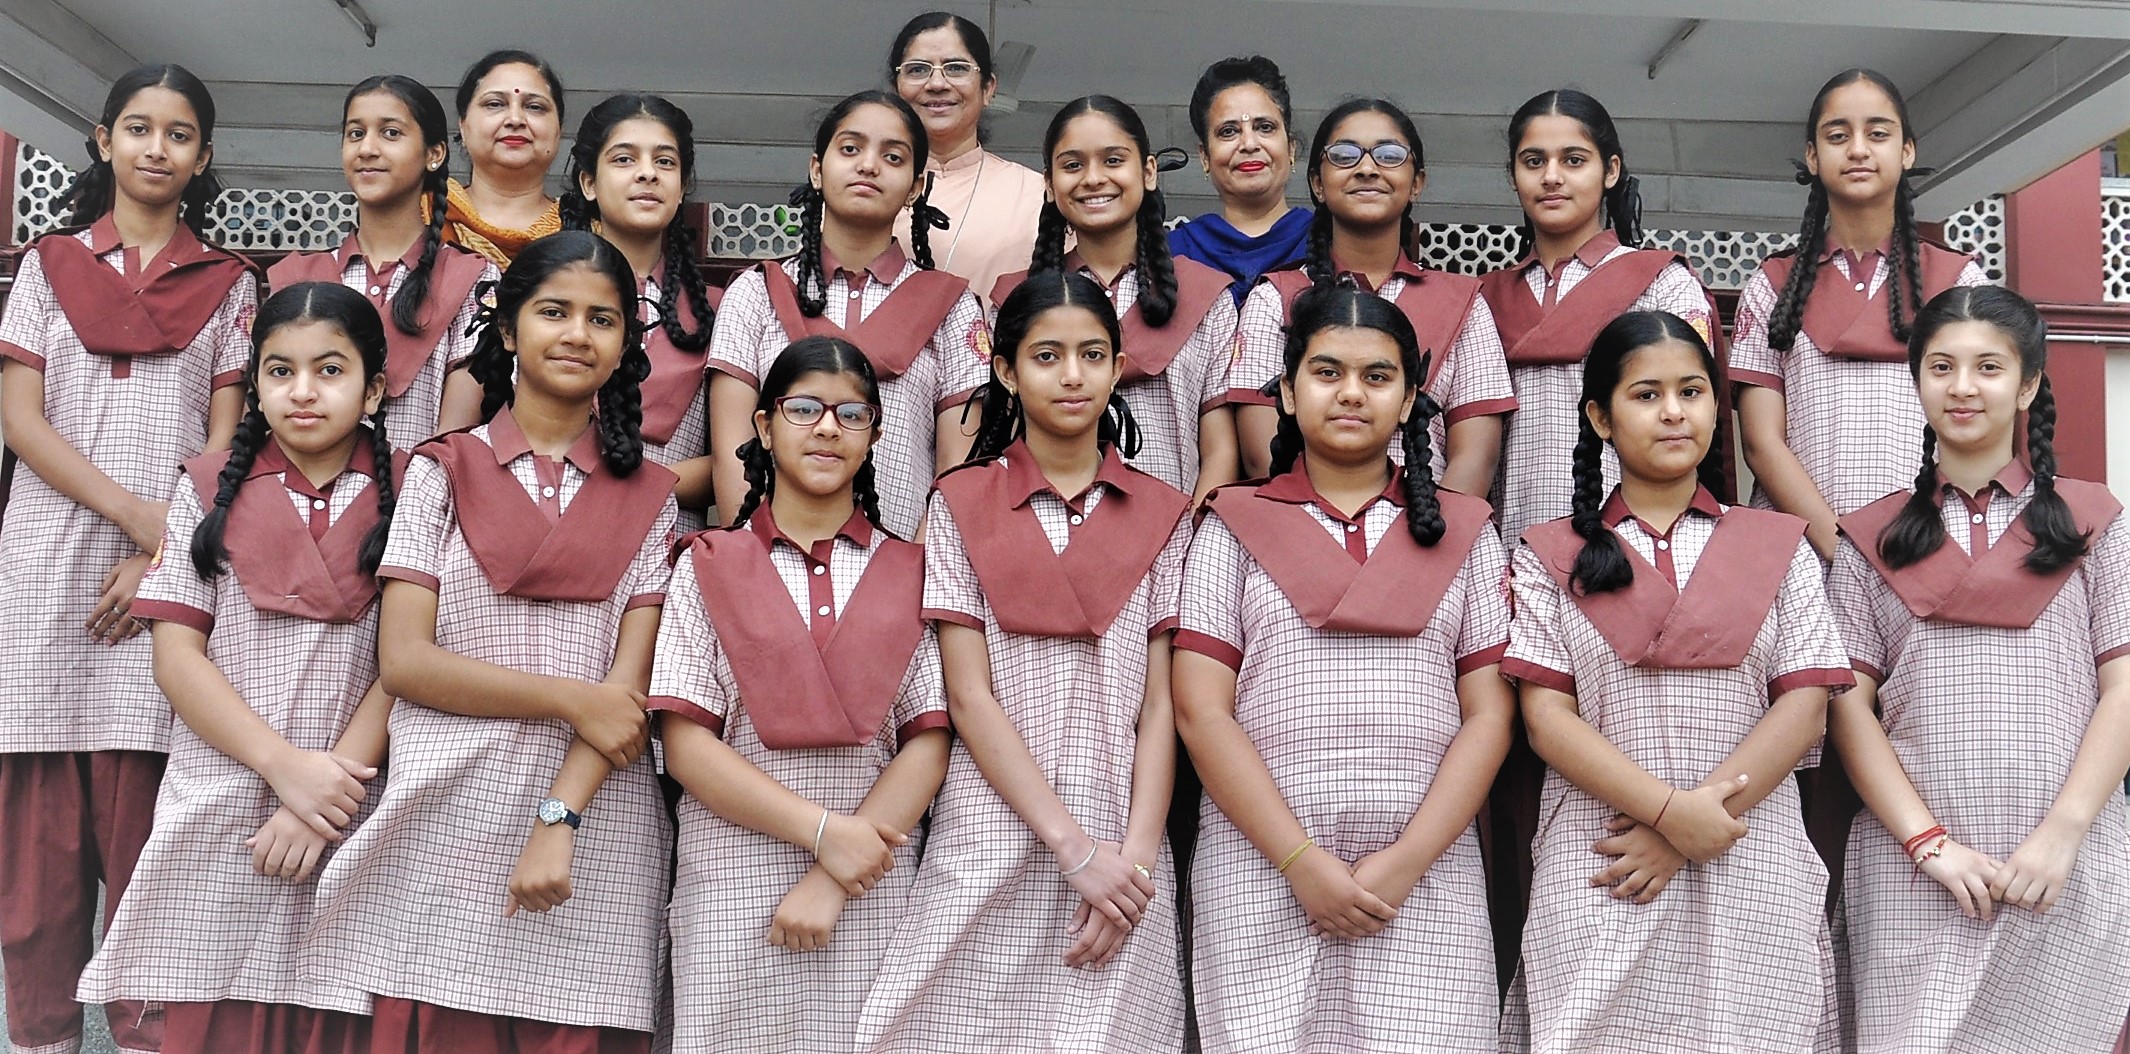 117 Carmel girls dominated the class VIII MSE Board results conducted by DIET Jammu under JKBOSE with 100 % result and 16 positions. 